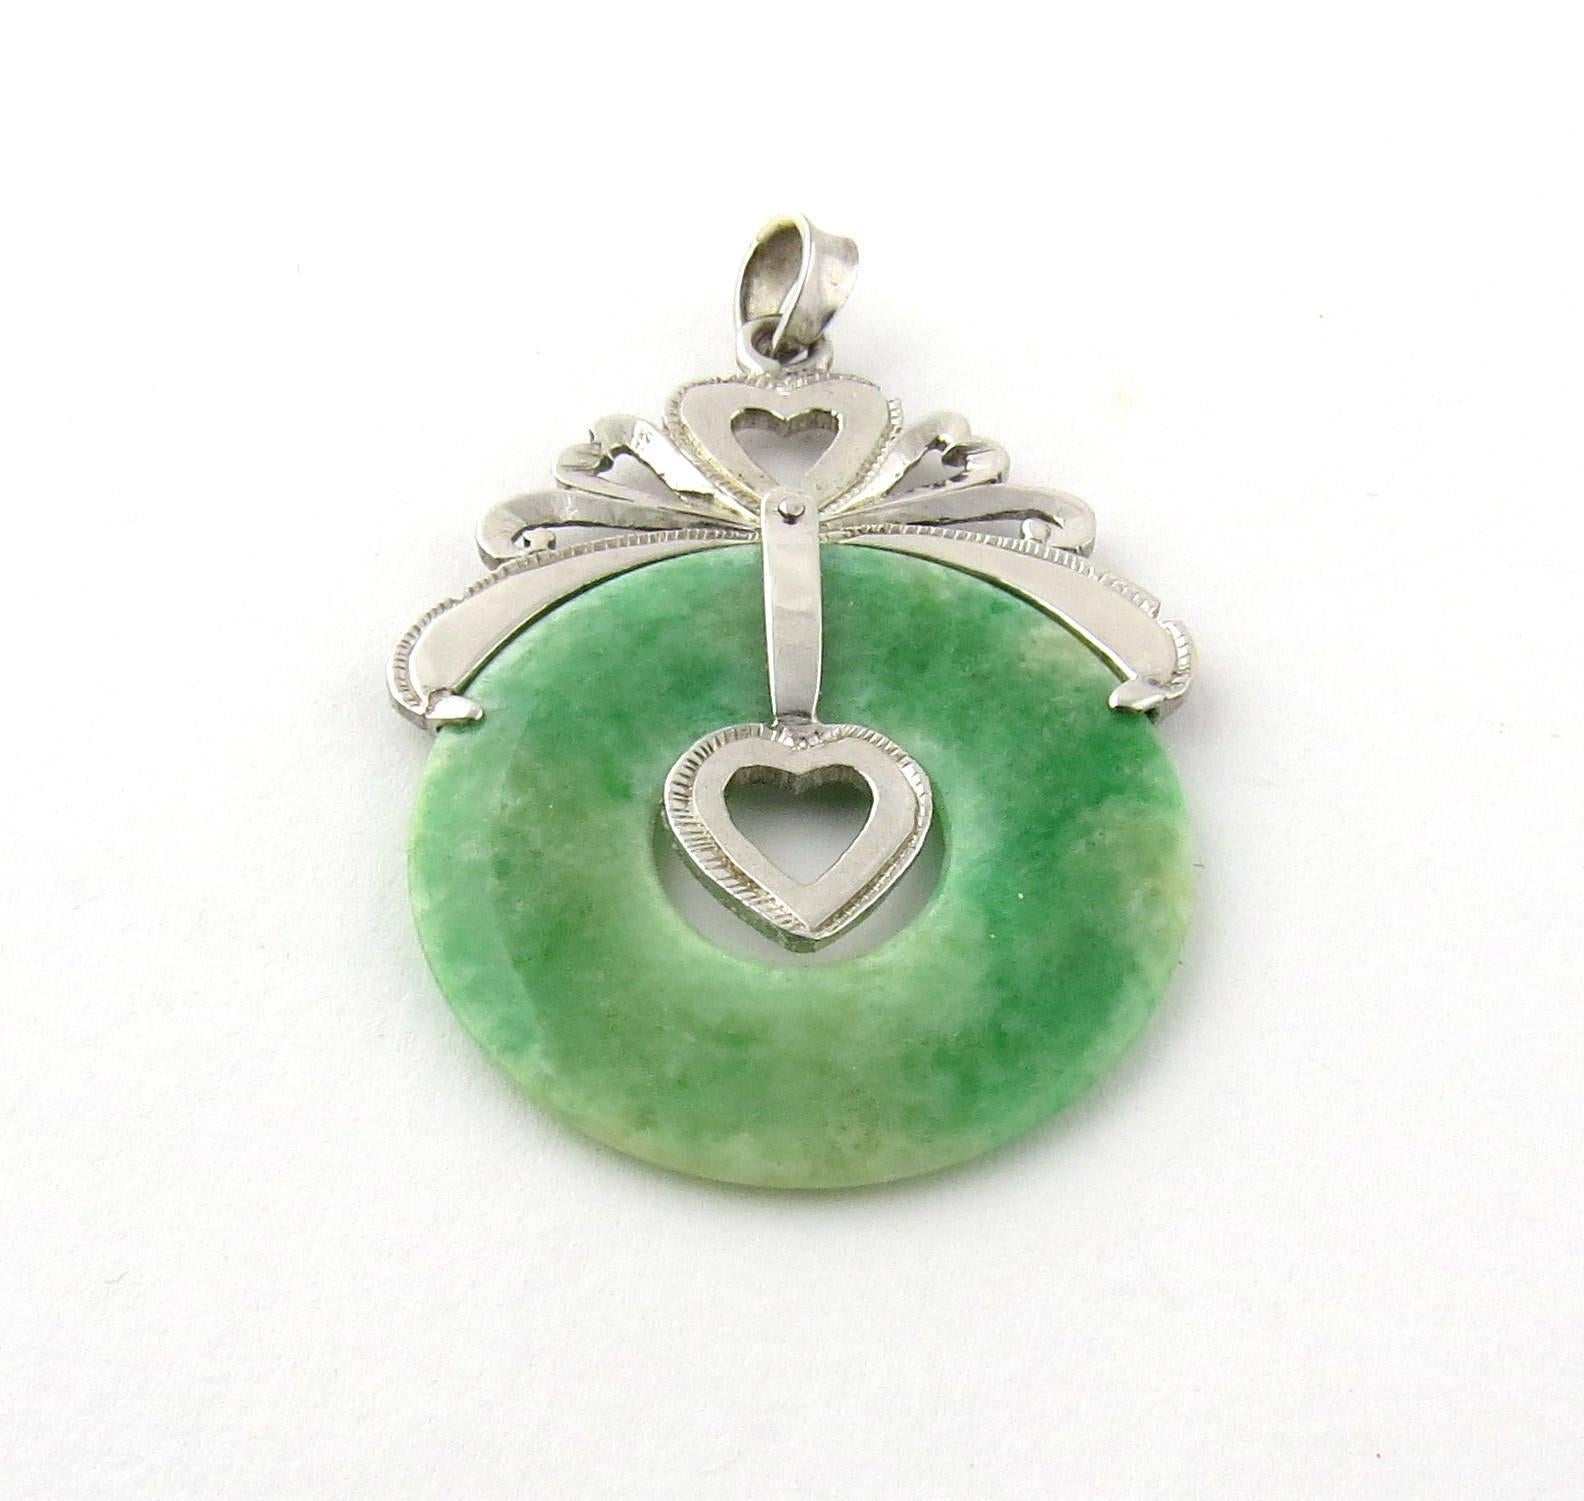 Vintage Sterling, Palladium and Jade Heart Circular Pendant

Hangs 42 mm in length 28 mm wide

2mm thick

3.15 dwt /4.9 g

The metal was X-rayed and determined to be 72% silver and 10% palladium.

Does not come with chain - chain available upon